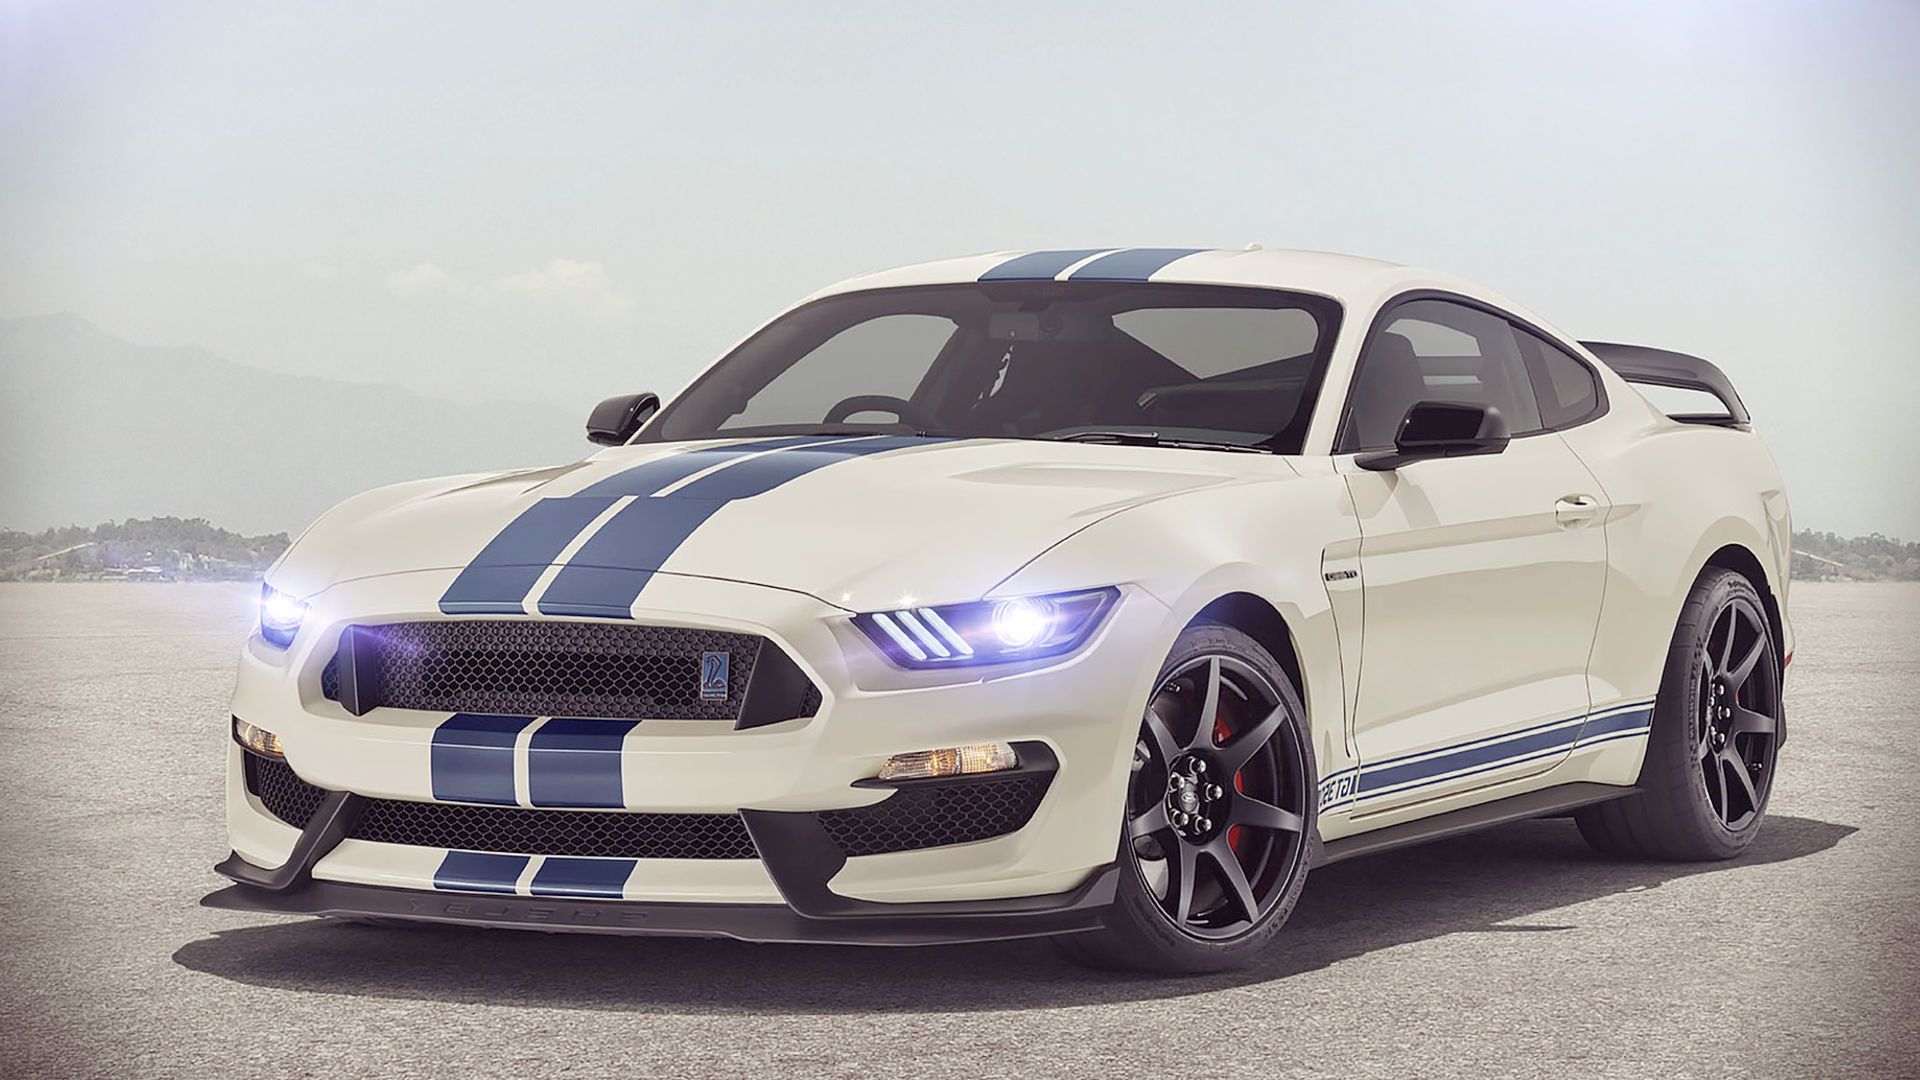 Ford Mustang Shelby GT350 Heritage Edition Wallpaper